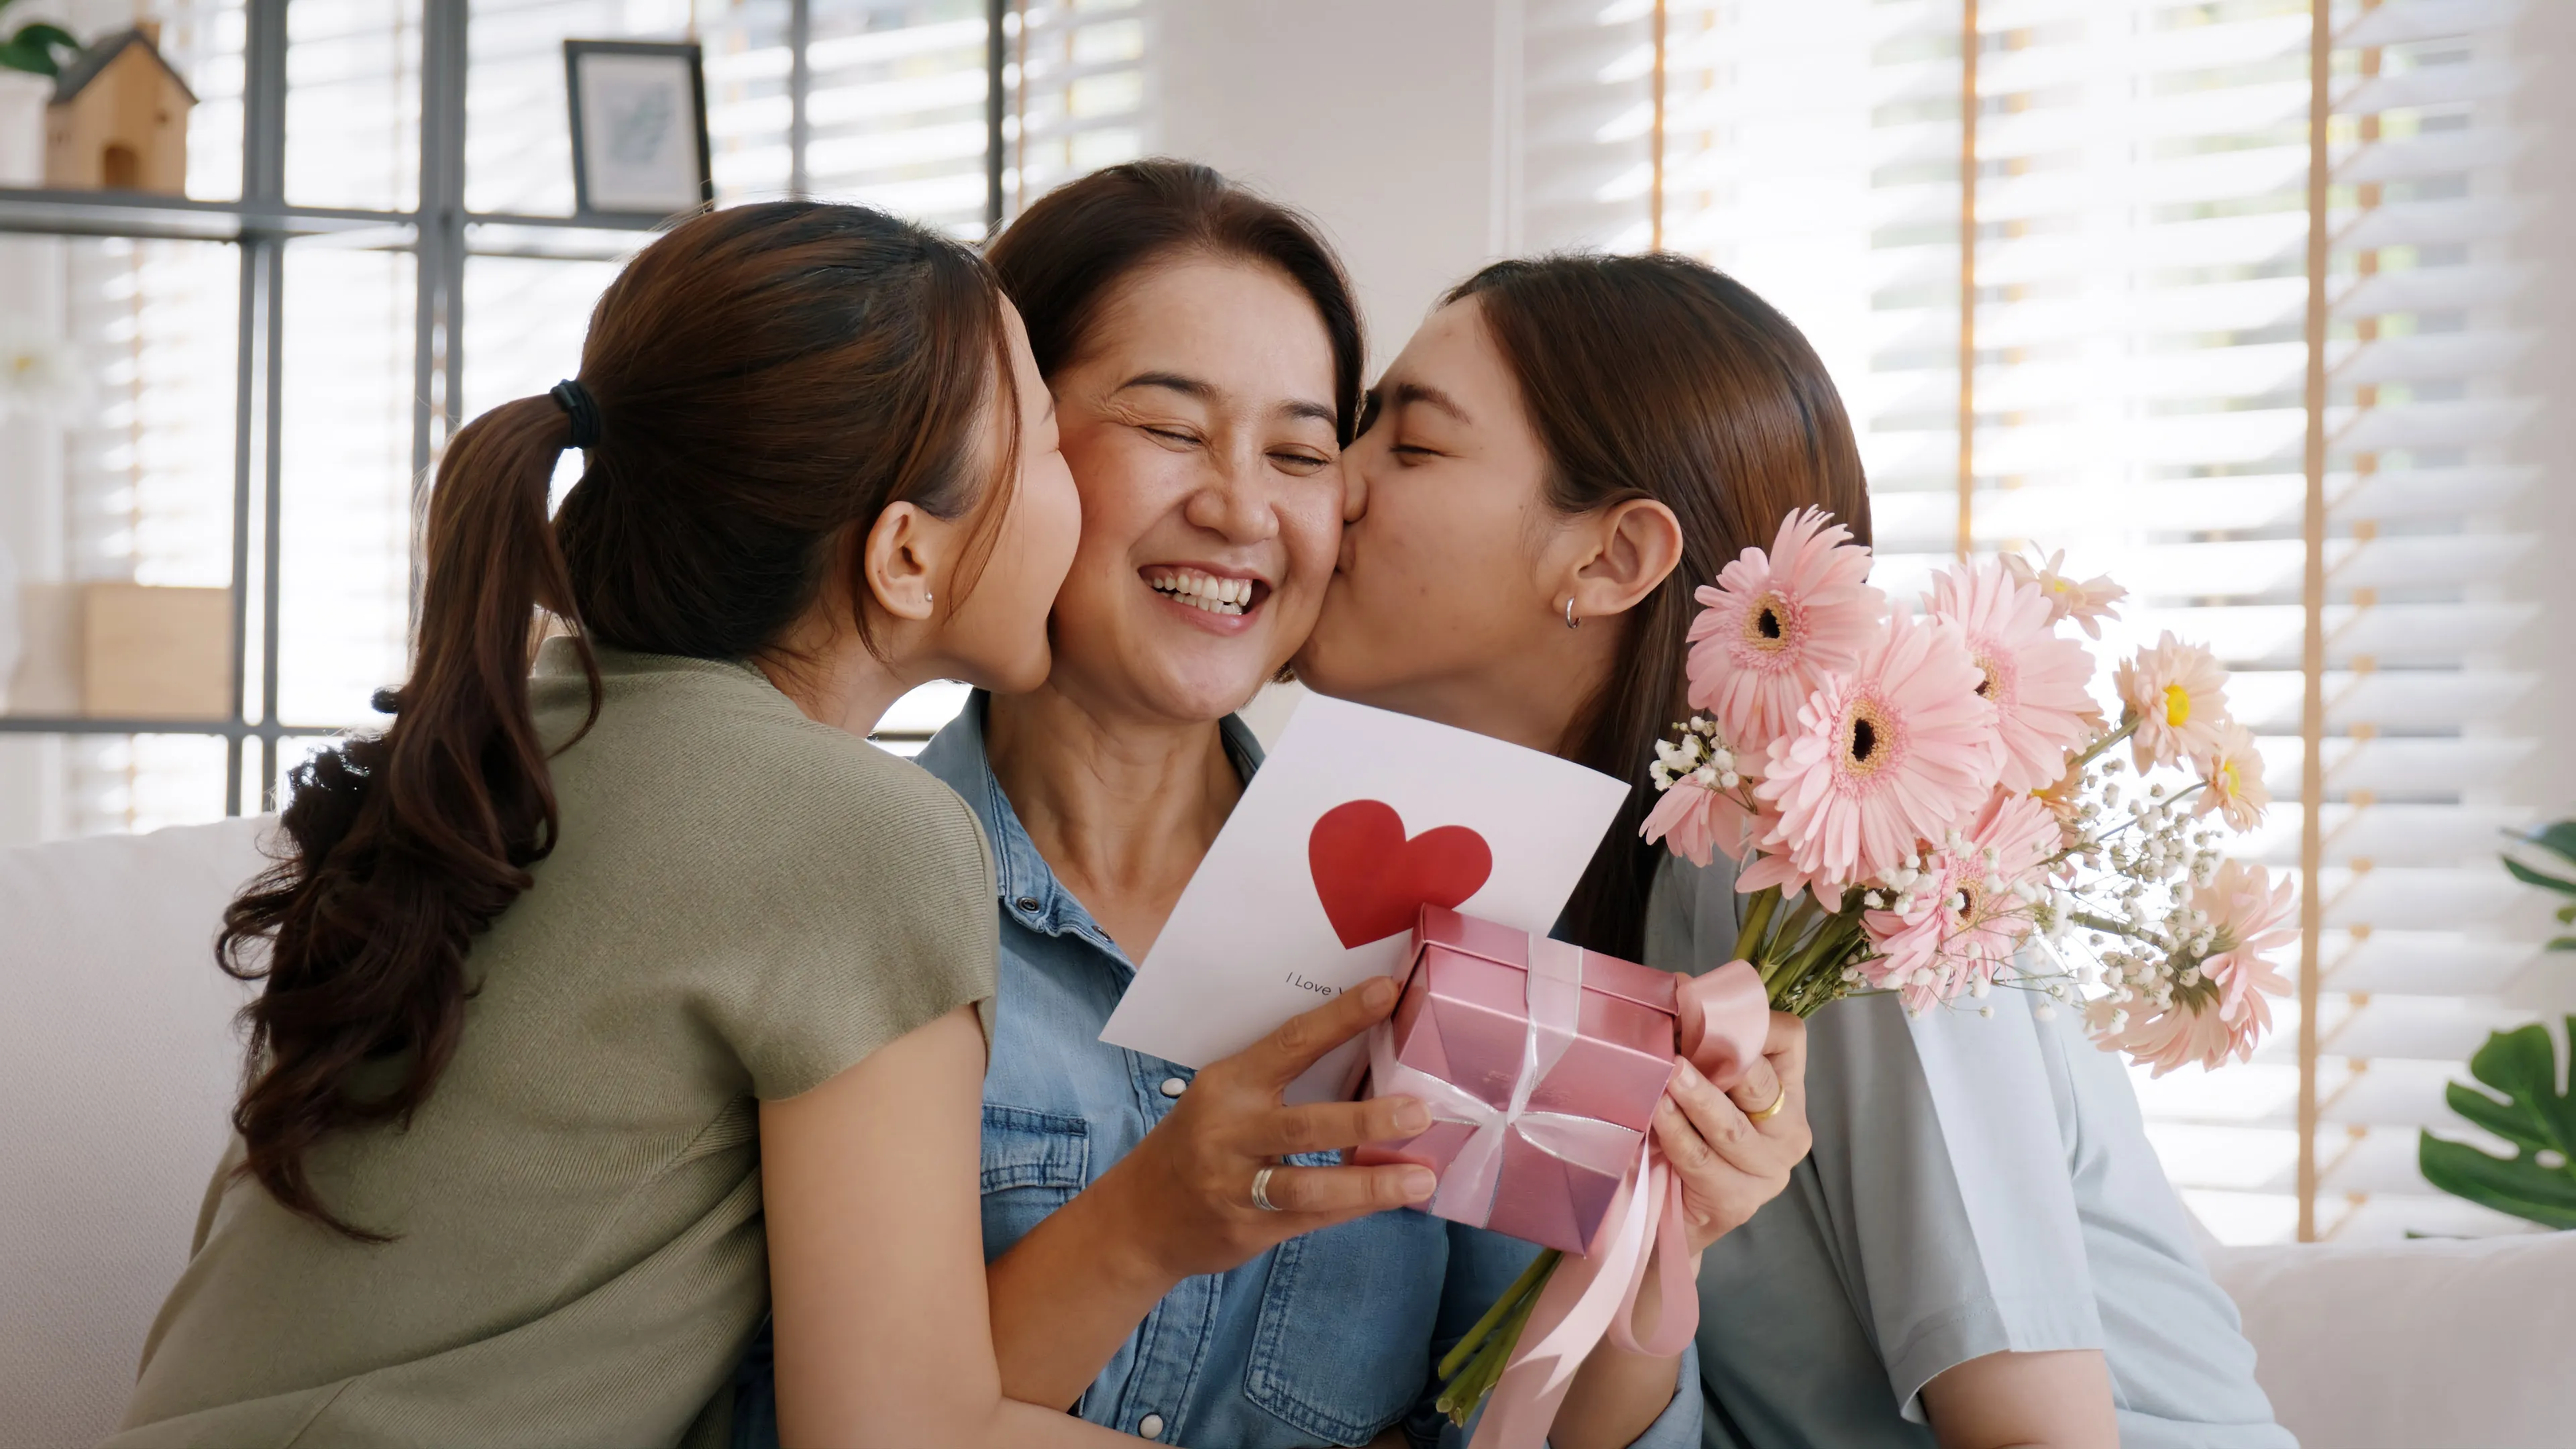 unique gift ideas for mother’s day in the philippines